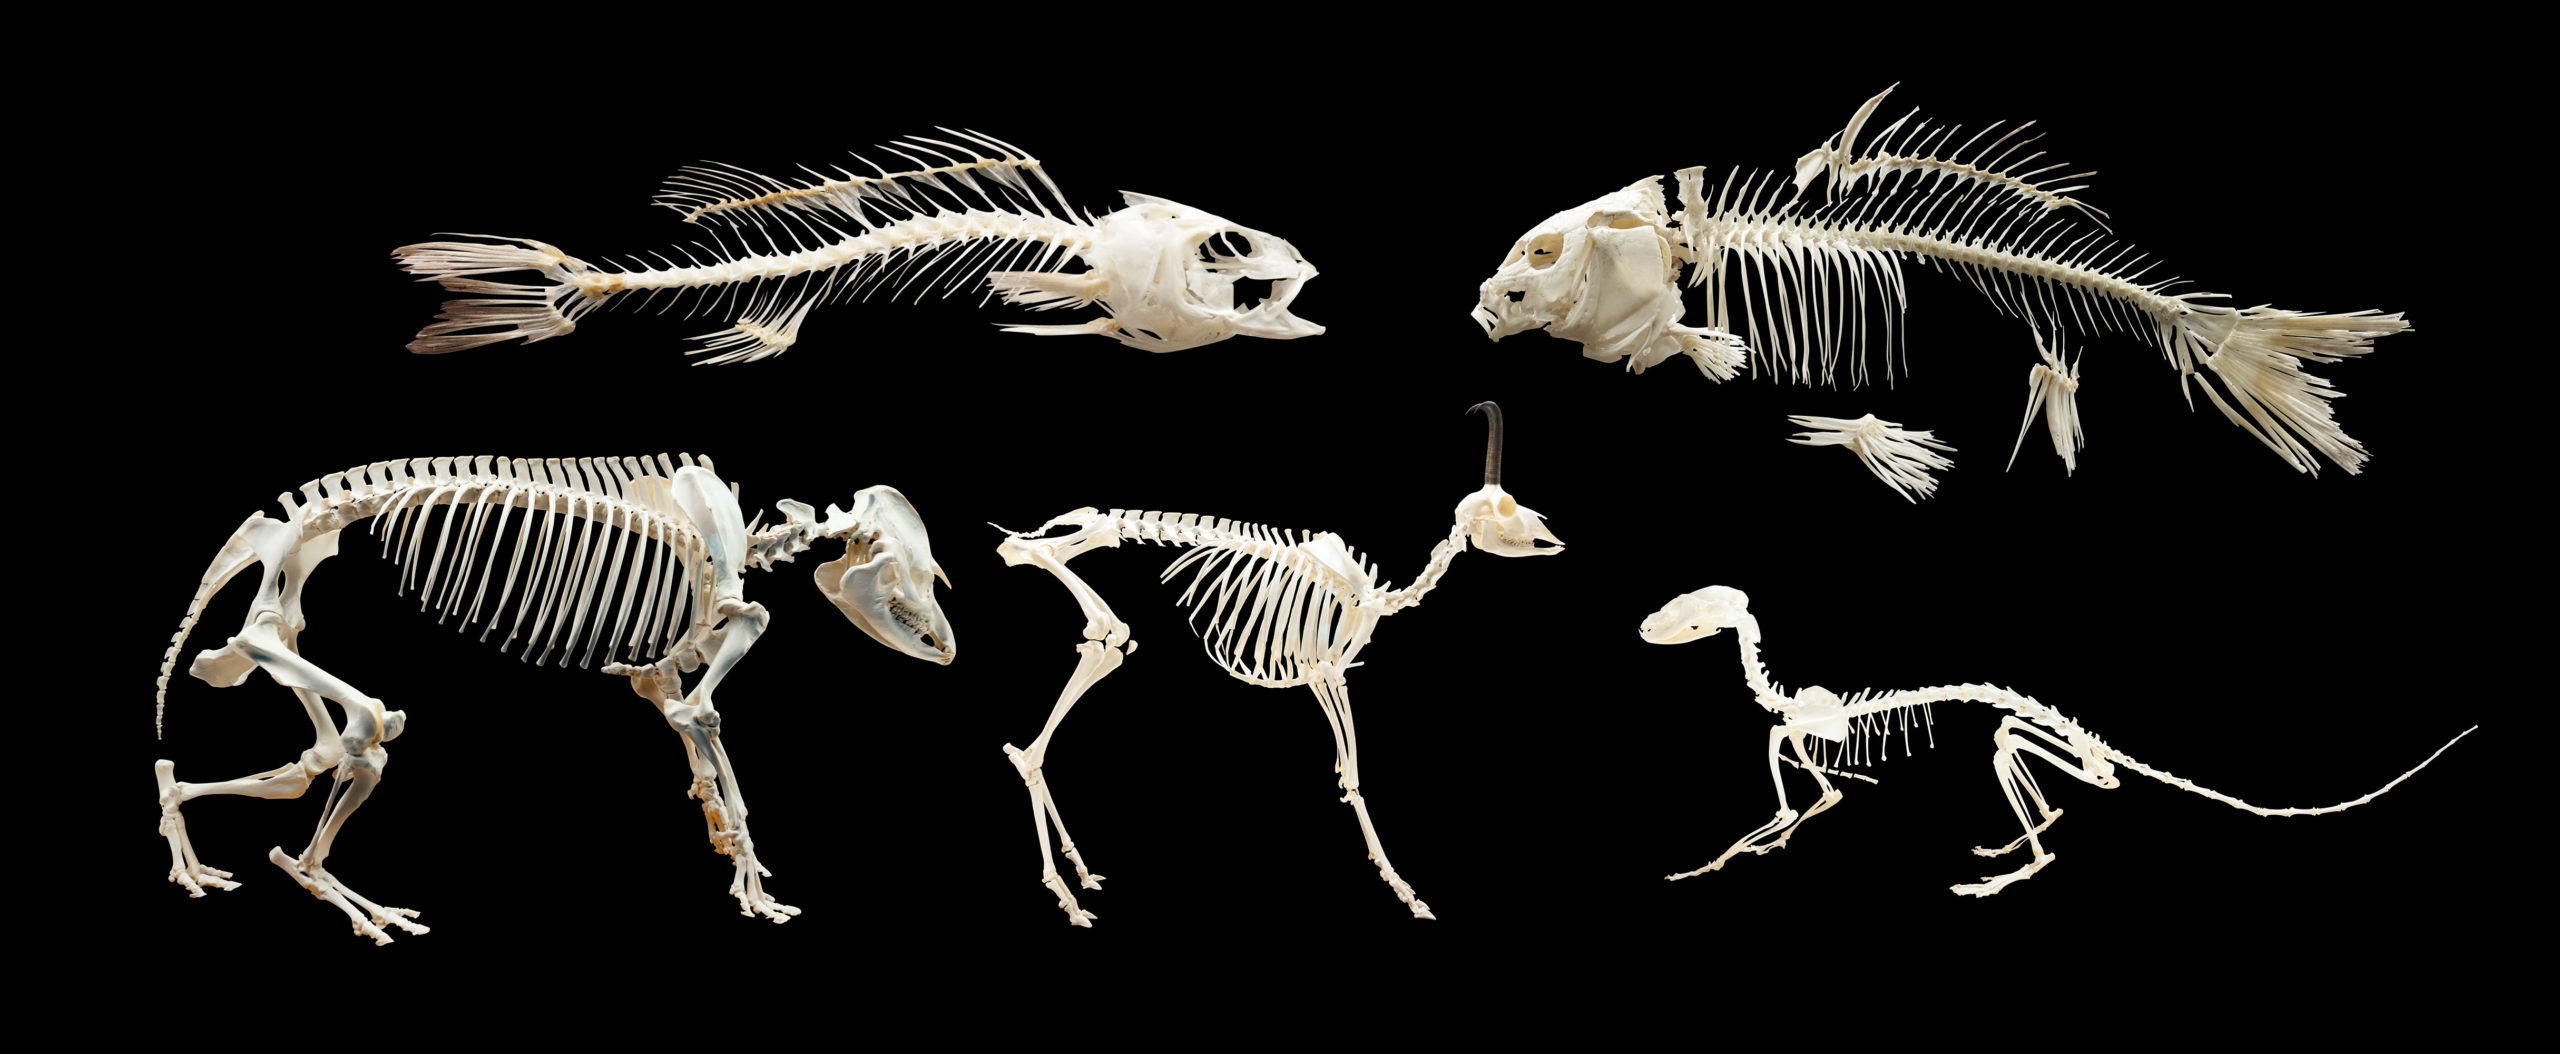 Set of skeletons of animals and fish. Isolated over black